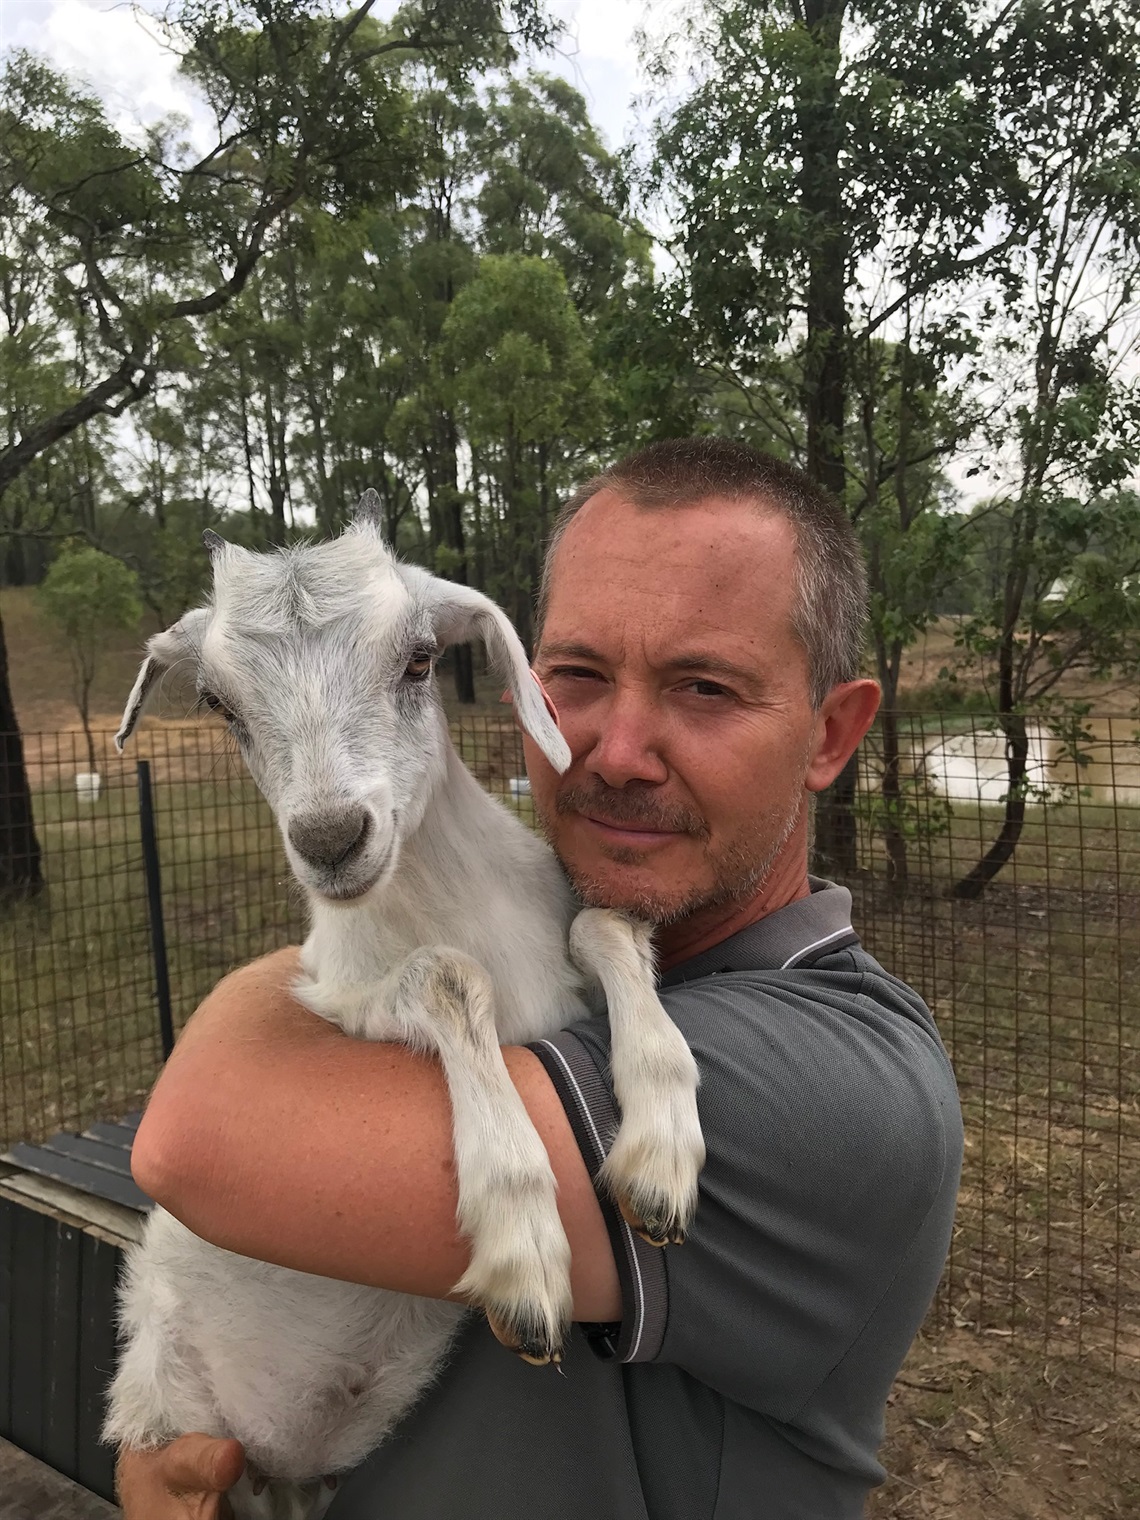 Photo of local author local author Todd Alexander holding a goat.